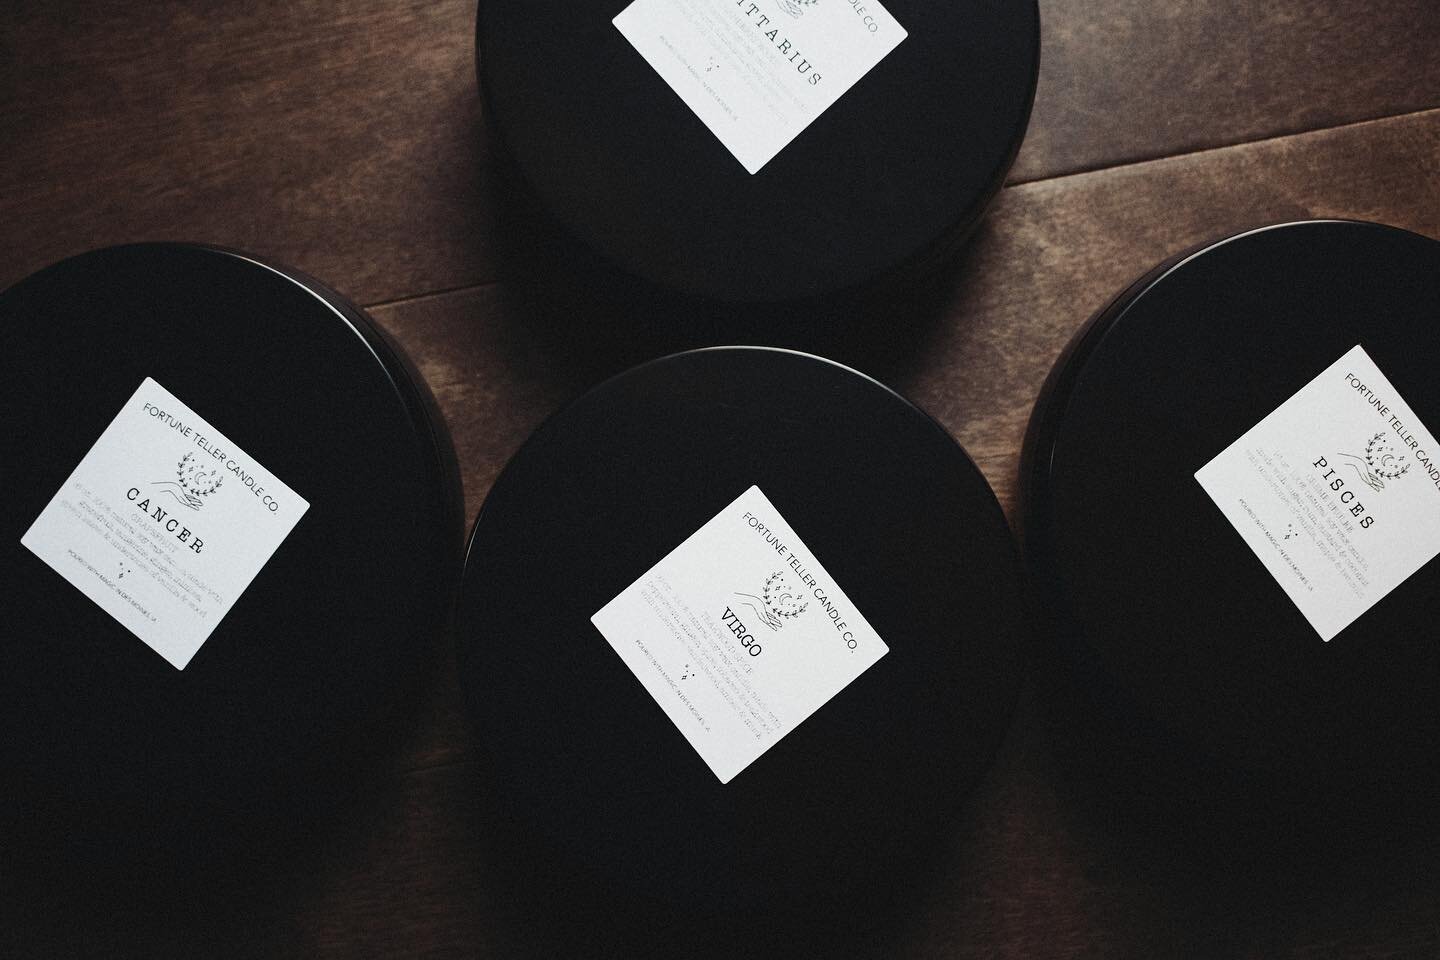 ✨JUST LAUNCHED!✨
.
.
@fortunetellercandleco is BEYOND EXCITED to announce our brand new 16 oz. Black Matte Tins!
.
Our FIRST EVER triple wick candles made with our signature ZODIAC collection scents. If you want to bring the perfect moody fall astati